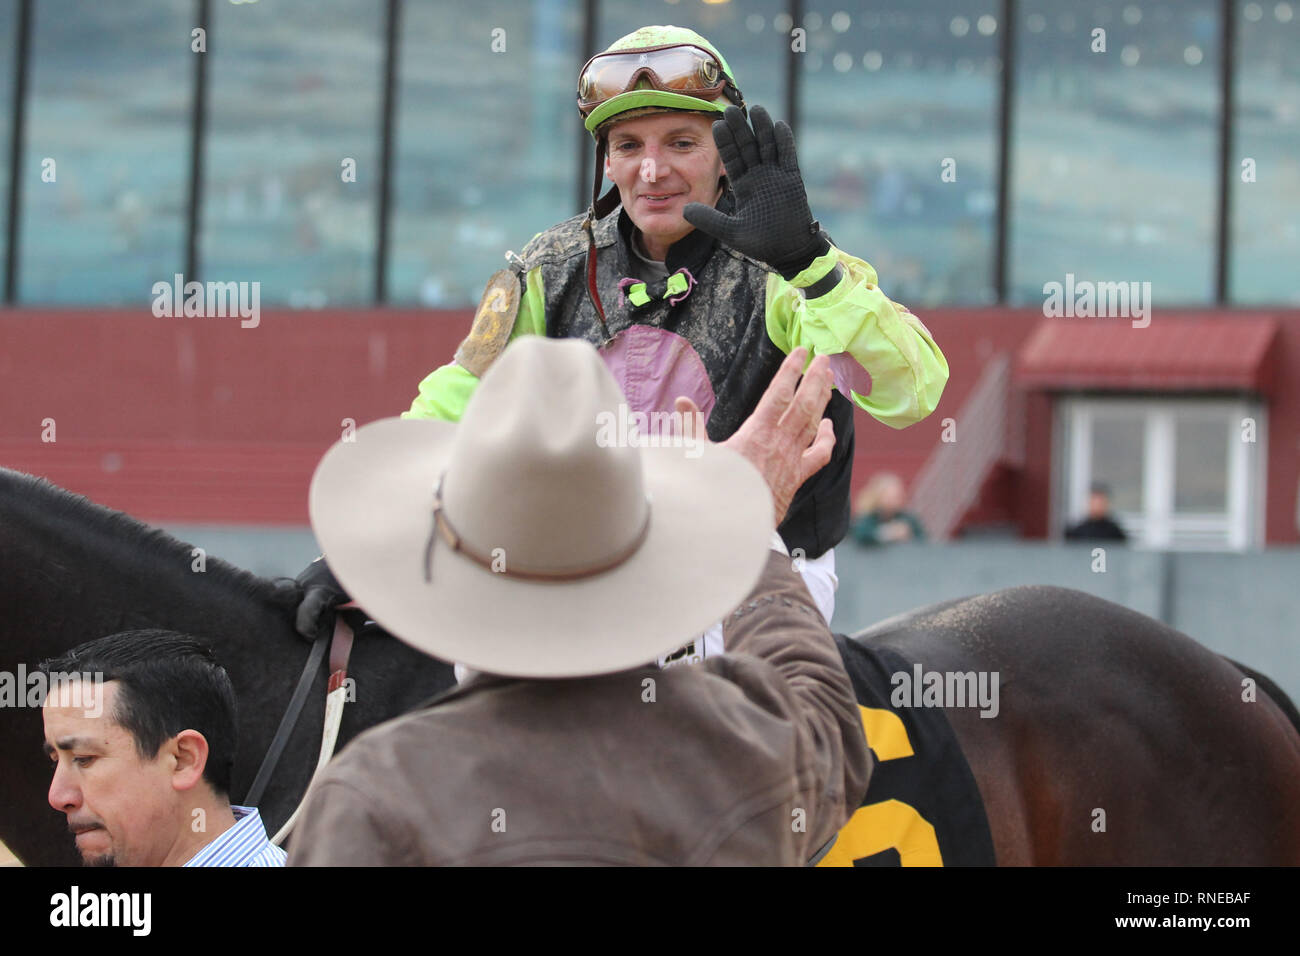 Hot Spring, AR, USA. 18th Feb, 2019. Feburary 18, 2019: Winning jockey Terry Thompson aboard Super Steed (6) after winning the Southwest Stakes at Oaklawn Park in Hot Spring, AR on February 18, 2019. © Justin Manning/Eclipse Sportswire/CSM/Alamy Live News Stock Photo